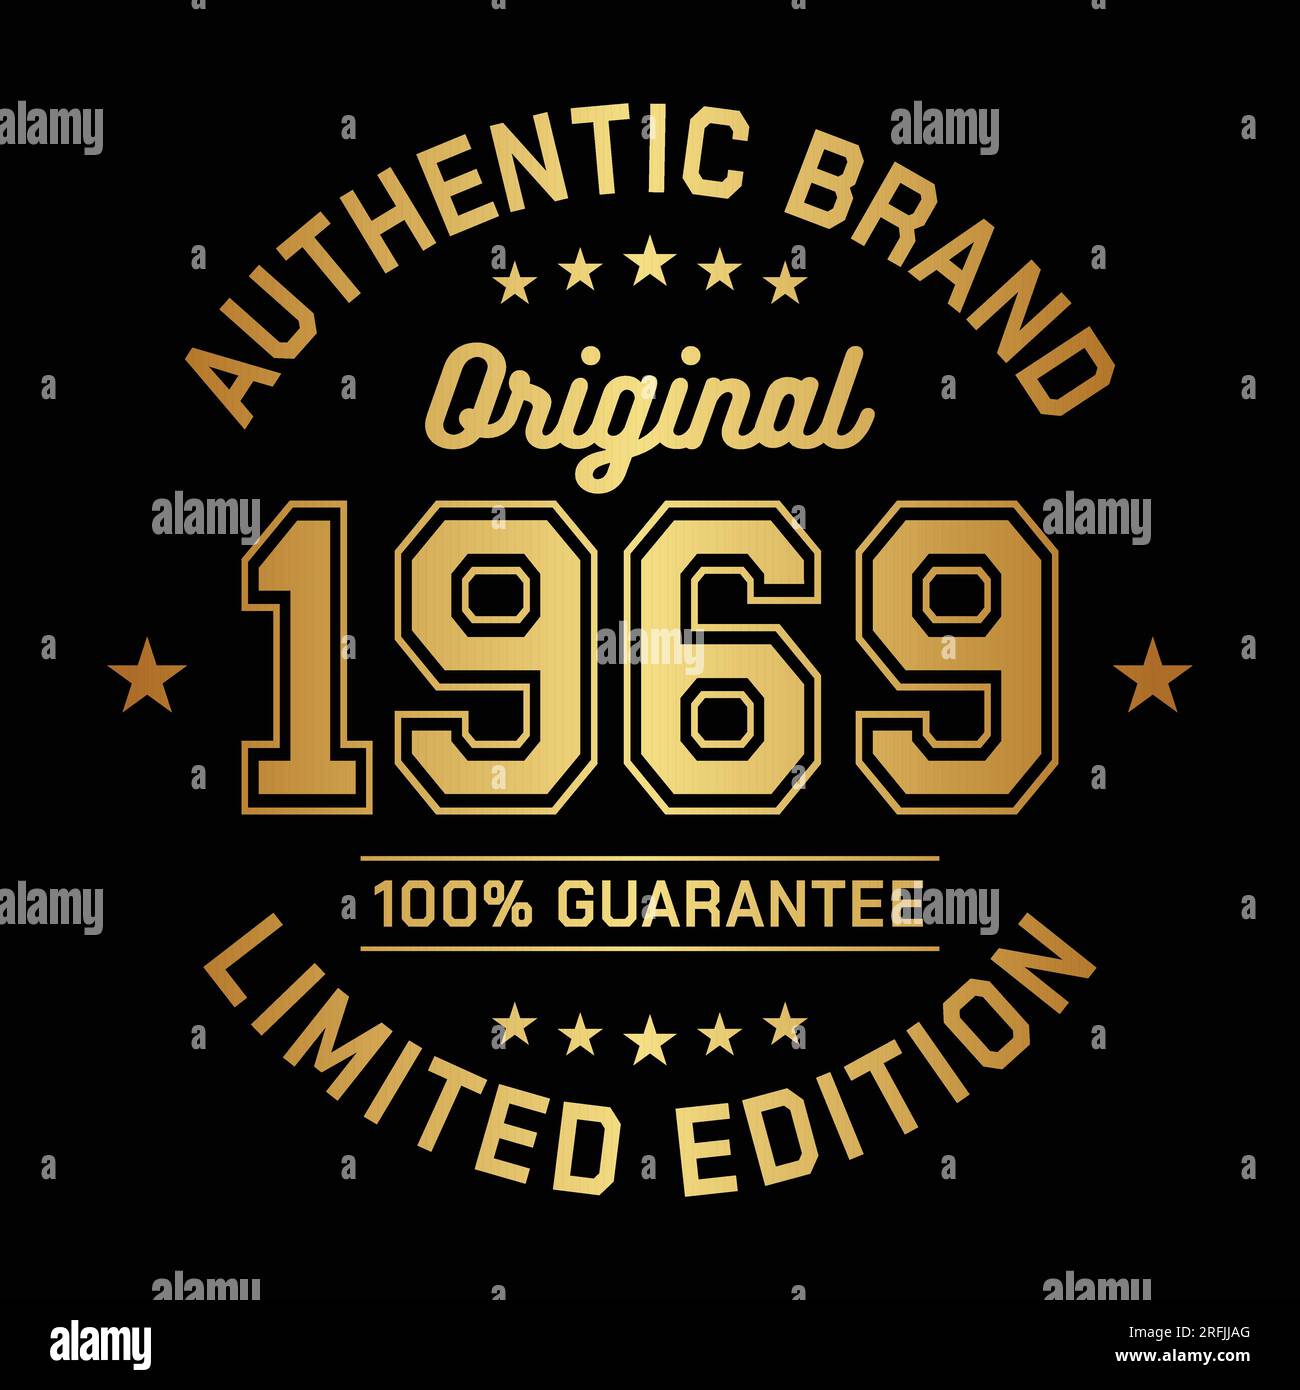 Authentic brand. Original 1969. Limited Edition. Authentic T-Shirt Design. Vector and Illustration. Stock Vector